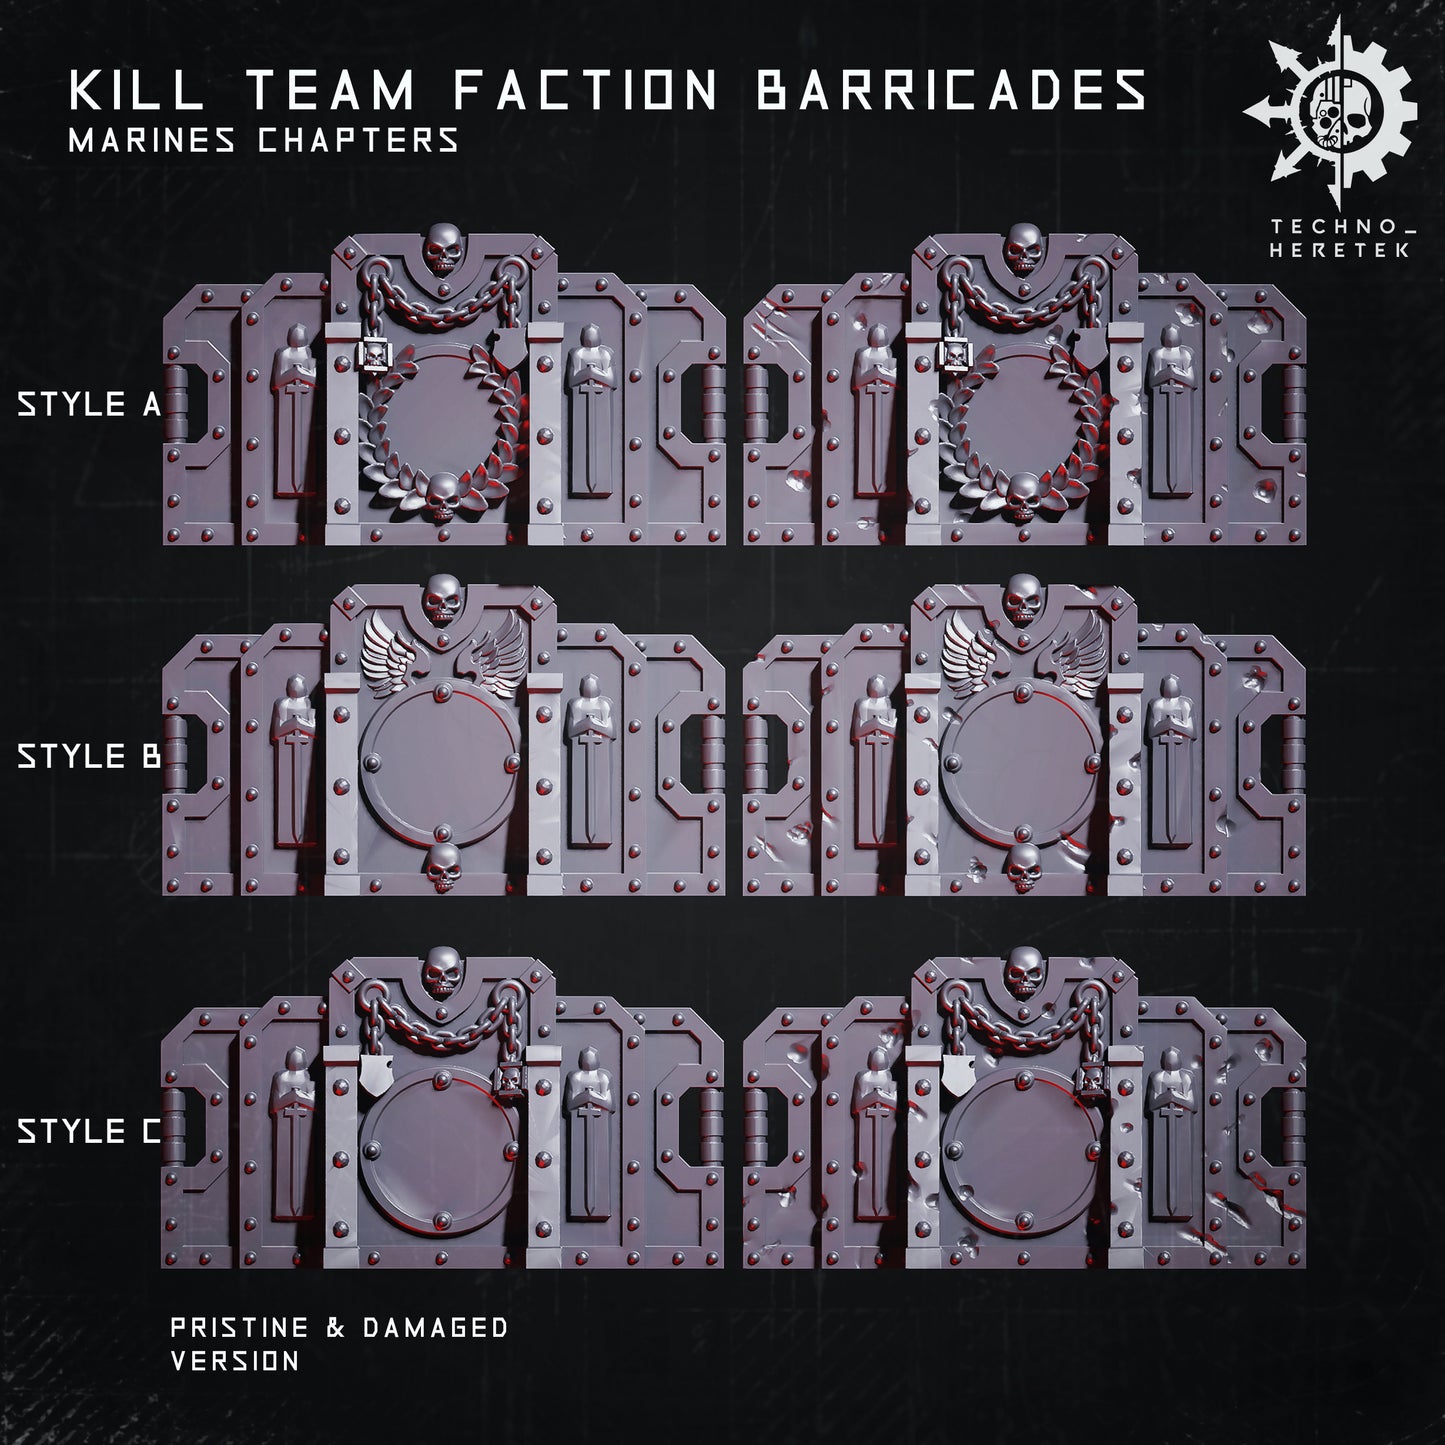 Marines Chapters Faction Barricades - for Kill Team